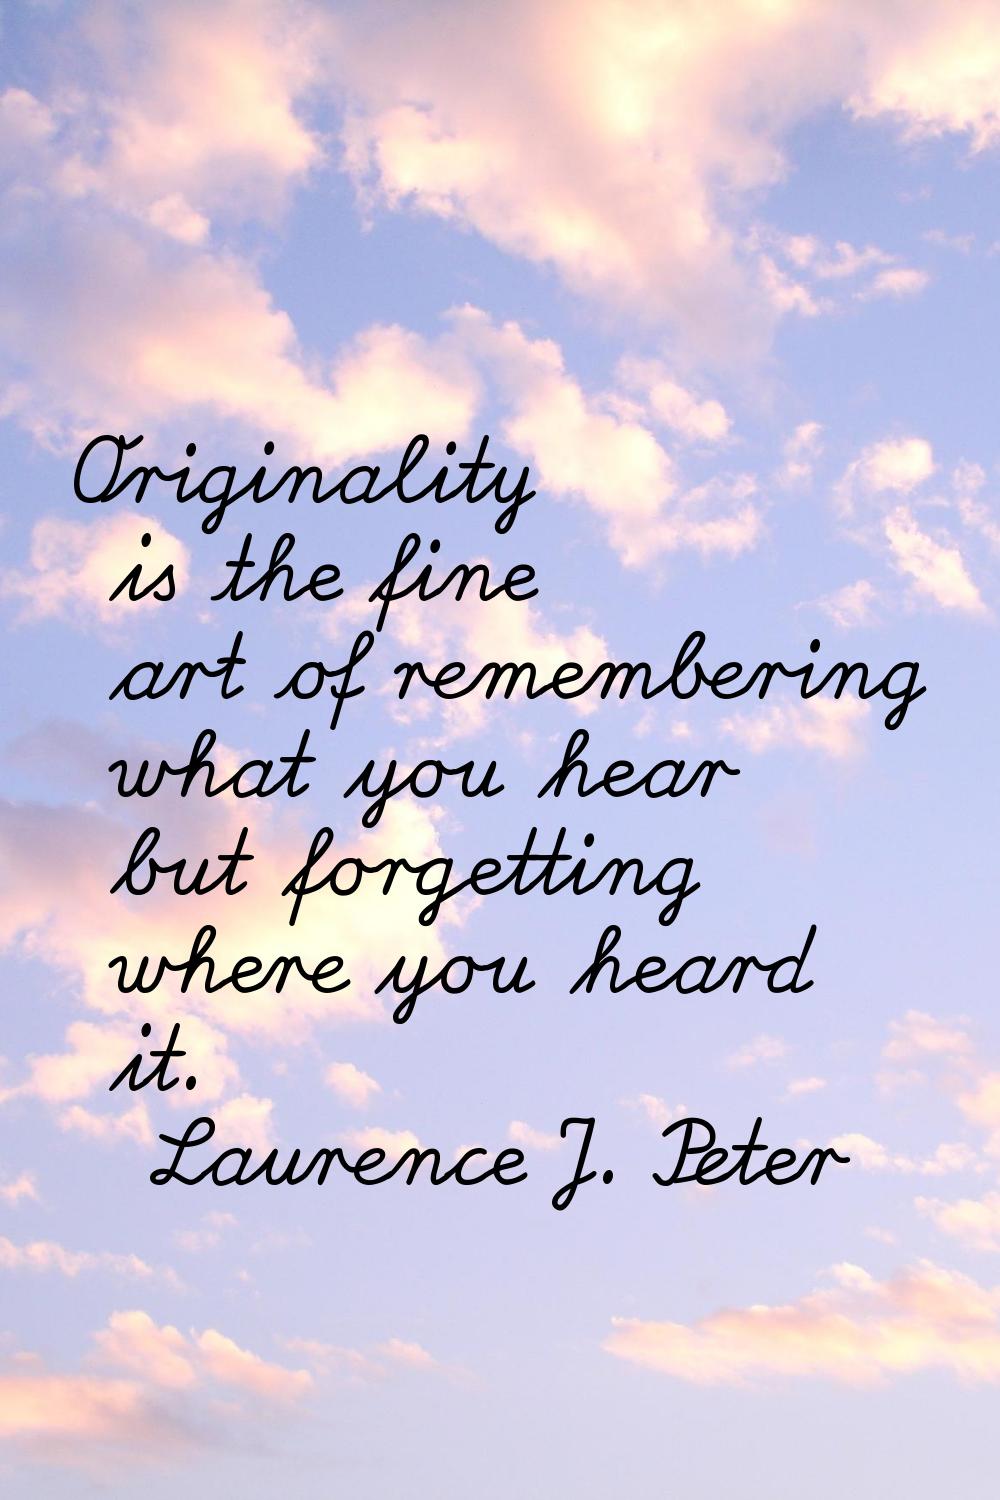 Originality is the fine art of remembering what you hear but forgetting where you heard it.